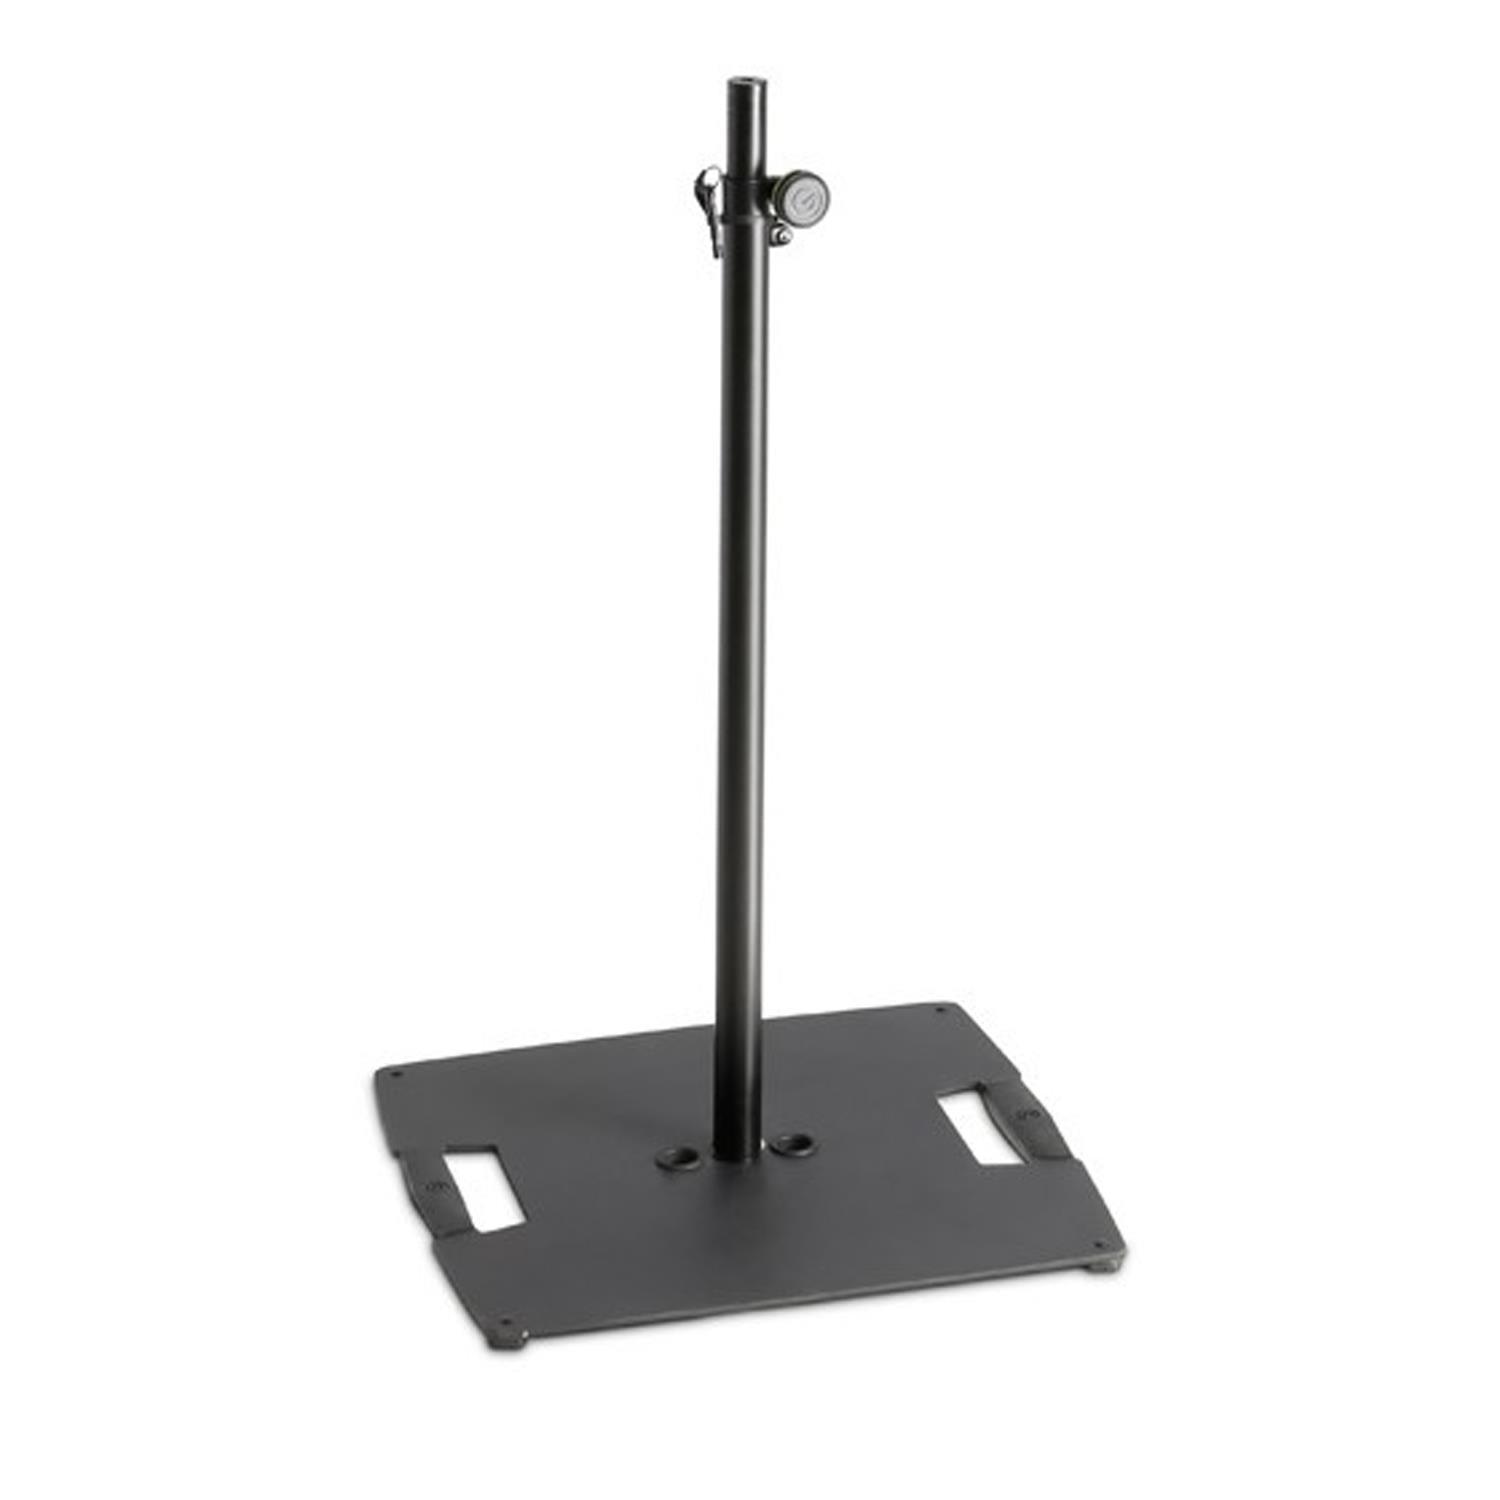 2 x Gravity LS 331 B Lighting Stand with Square Steel Base - DY Pro Audio